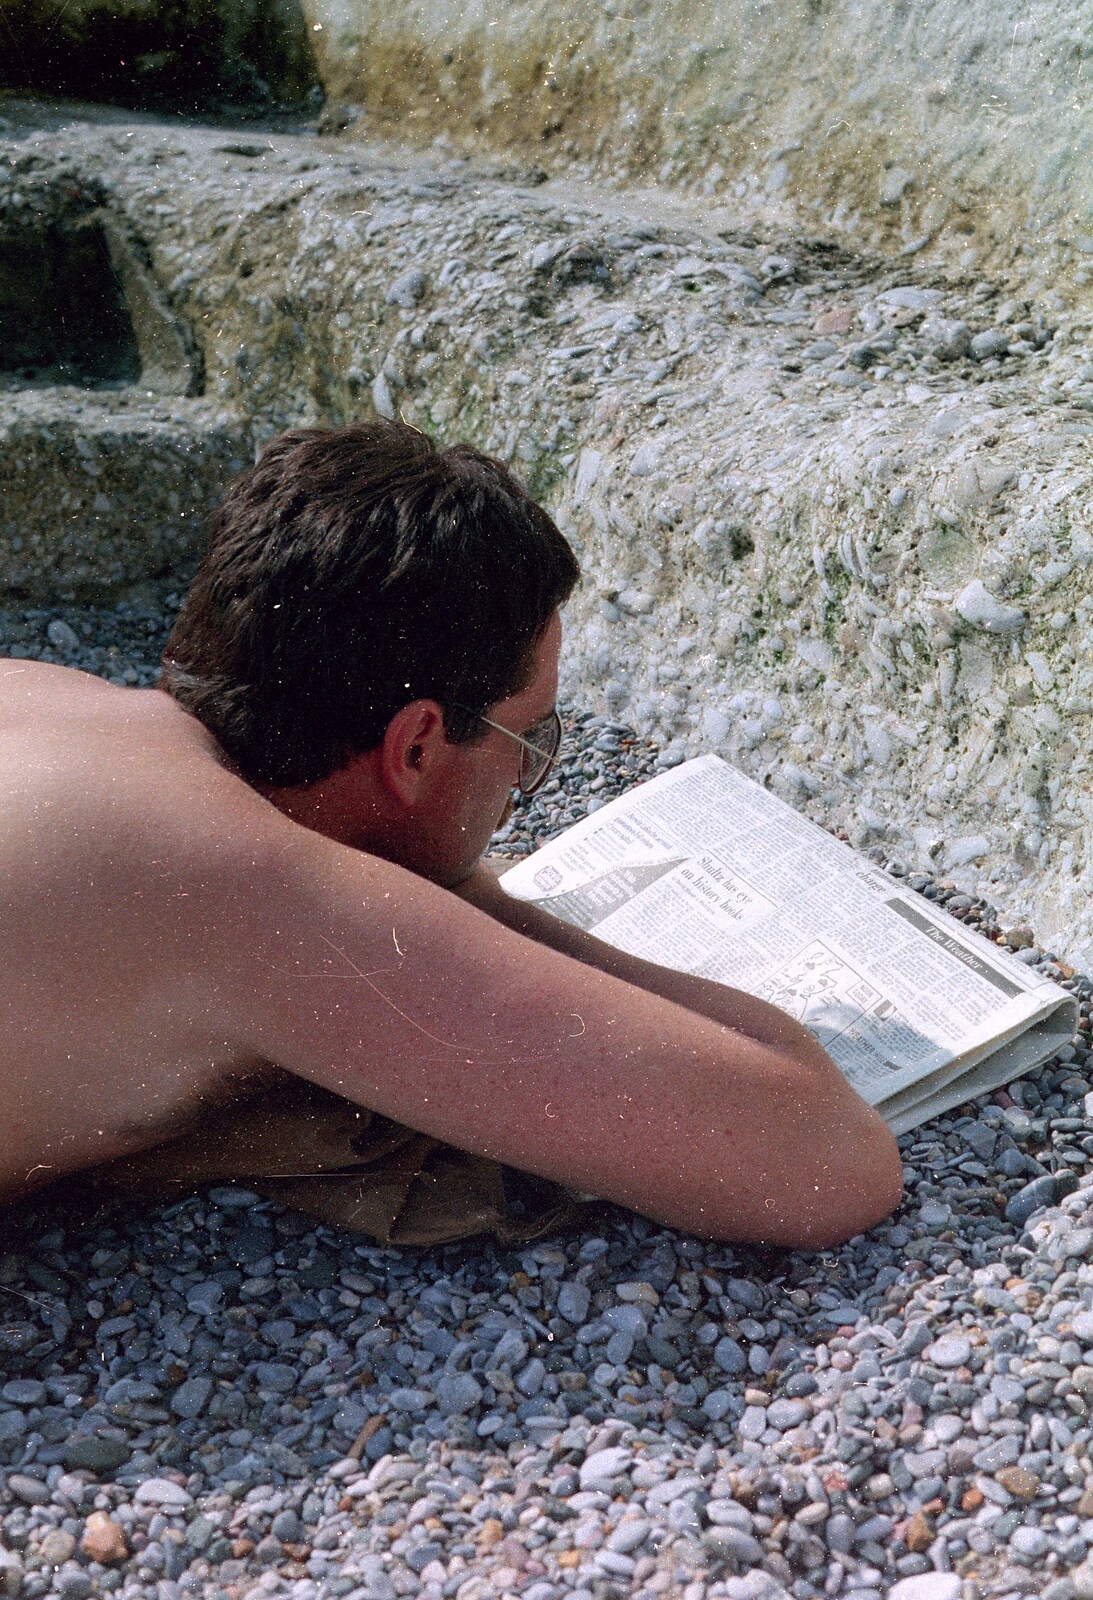 Ed reads the newspaper on the beach from Uni: A Neath Road Summer, St. Jude's, Plymouth - 18th August 1987